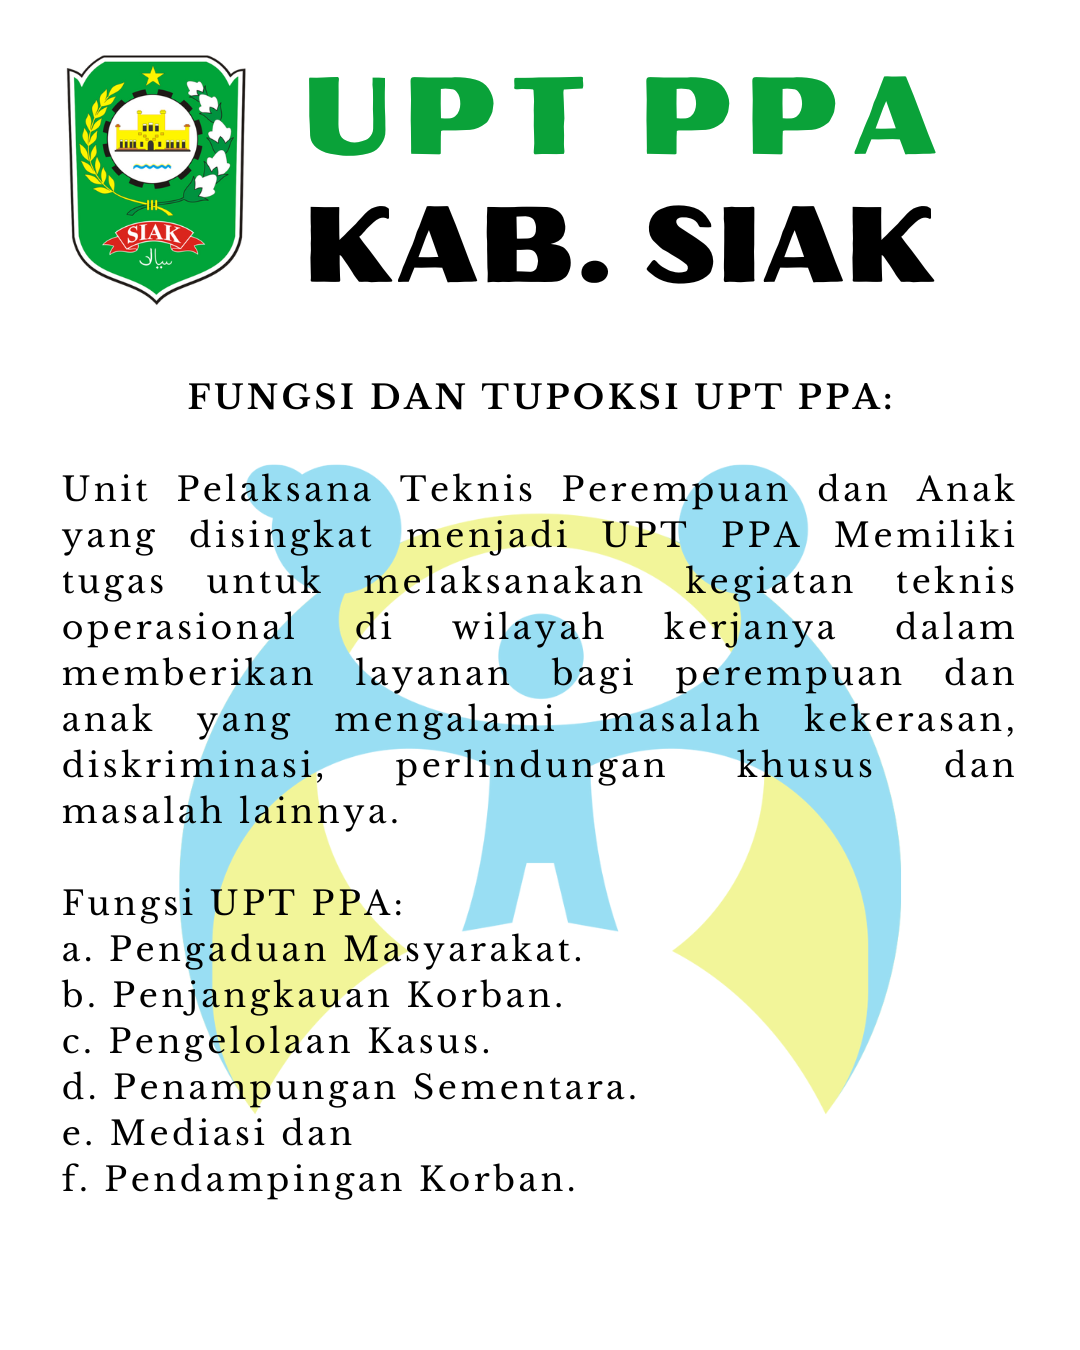 https://dpppappkb.siakkab.go.id/images/posting/65b8abed2ff30fungsidantupoksiuptppa.png